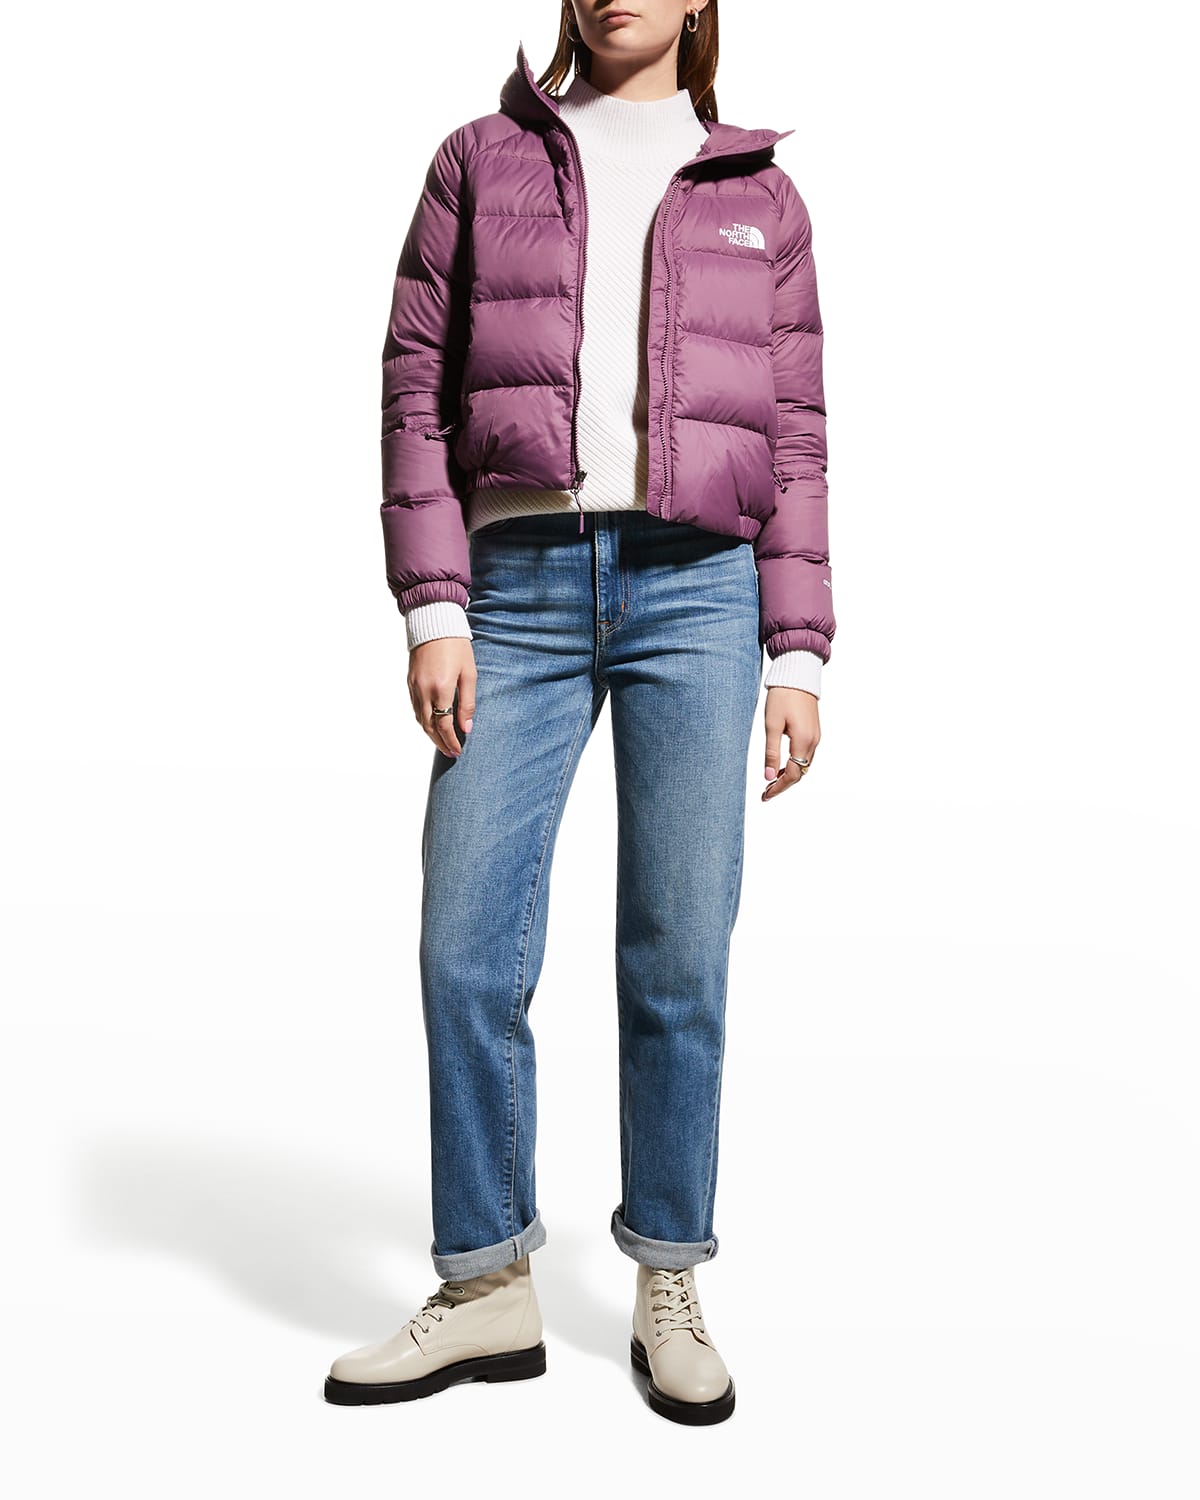 The North Face Women's Hyalite Down Hoodie